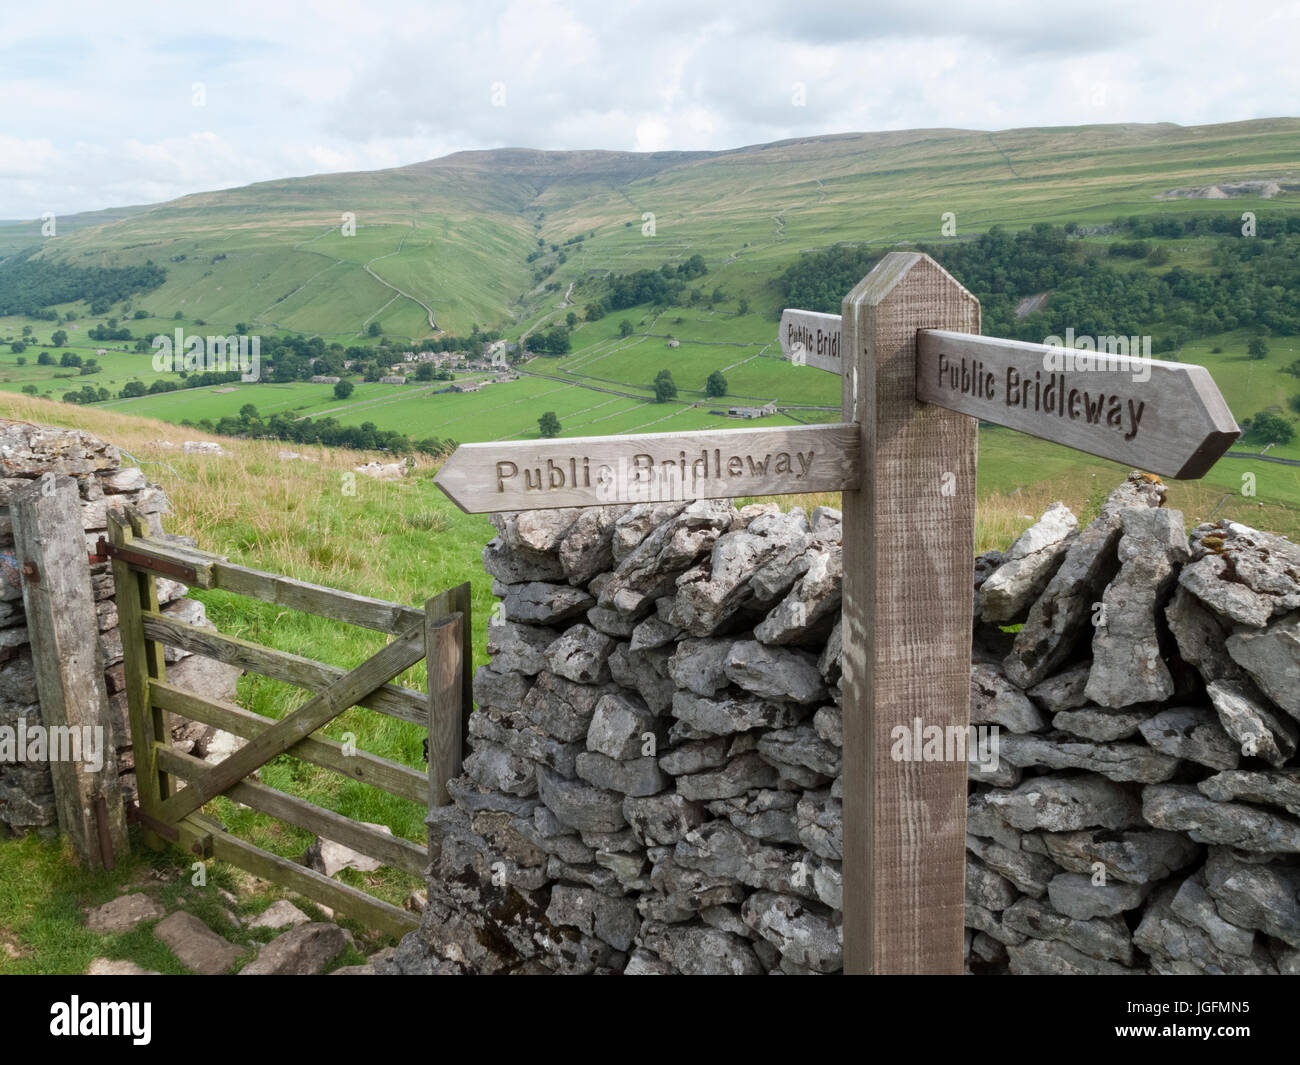 View of Starbotton in Upper Wharfedale with public bridleway sign, Yorkshire Dales National Park Stock Photo